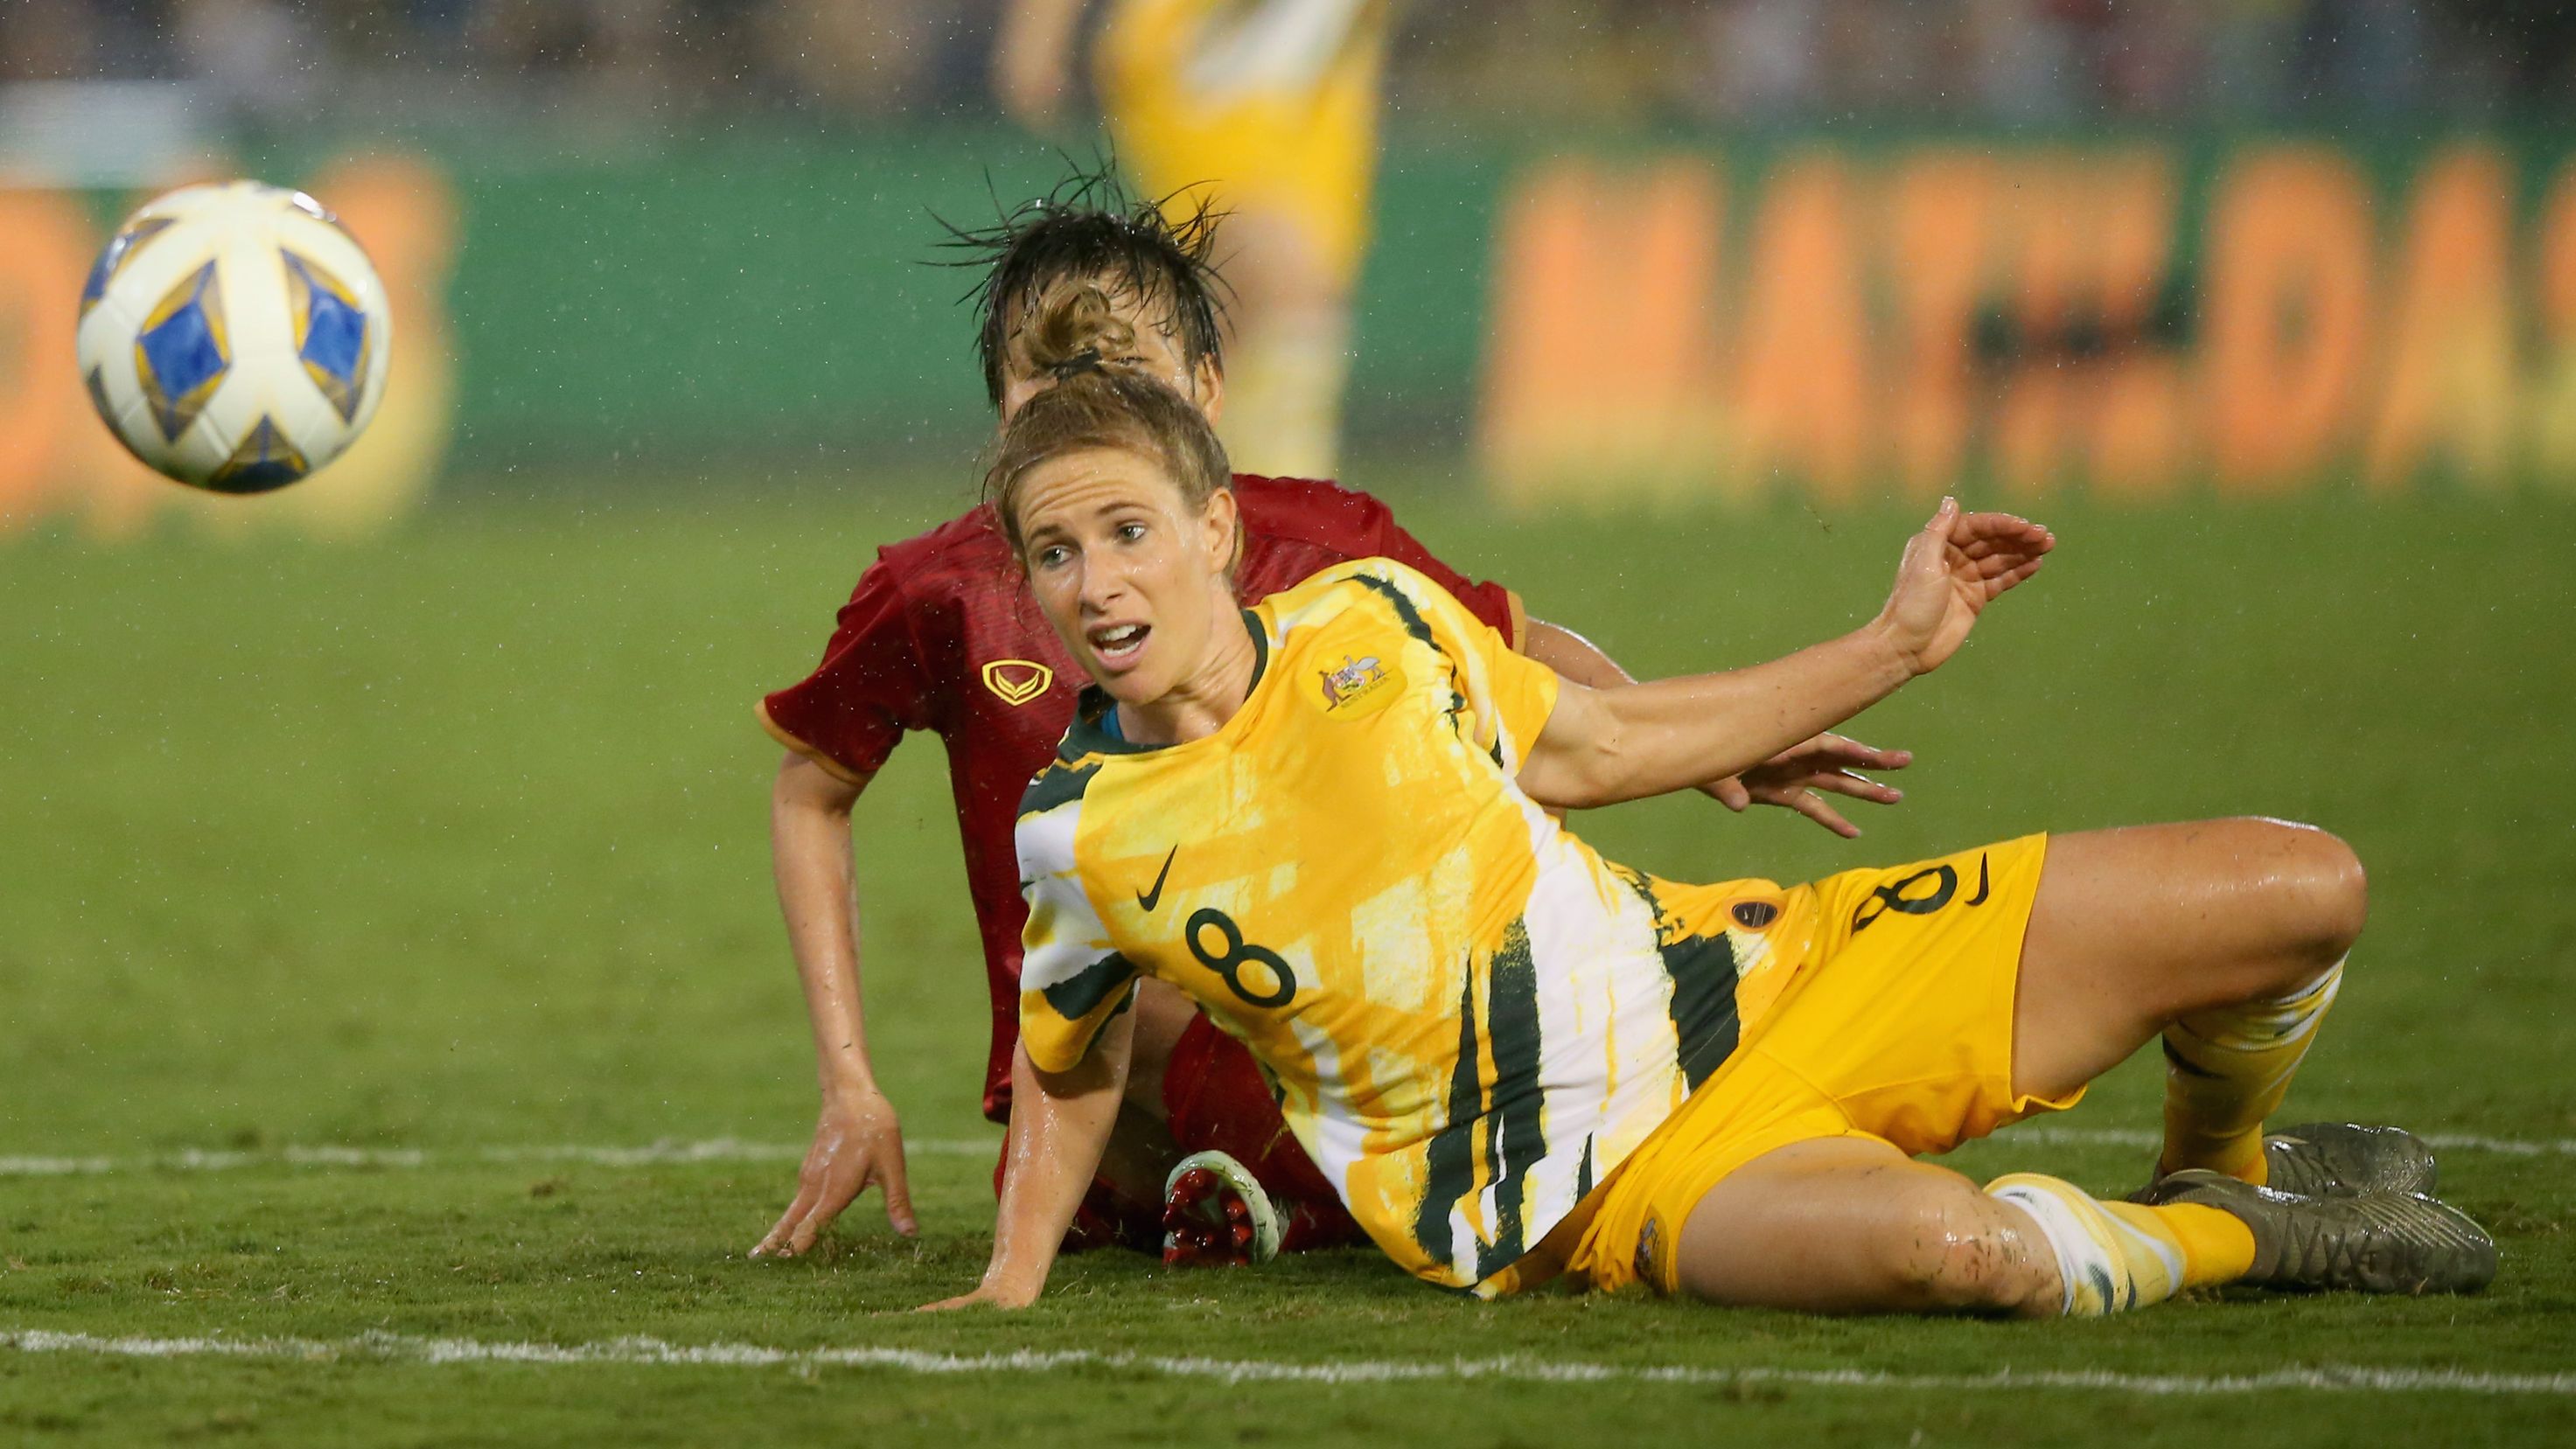 NEWCASTLE, AUSTRALIA - MARCH 06: Elise Kellond-Knight of the Australian Matildas contests the ball against Thai Thi Thao of Vietnam during the Women&#x27;s Olympic Football Tournament Play-Off match between the Australian Matildas and Vietnam at McDonald Jones Stadium on March 06, 2020 in Newcastle, Australia. (Photo by Ashley Feder/Getty Images)